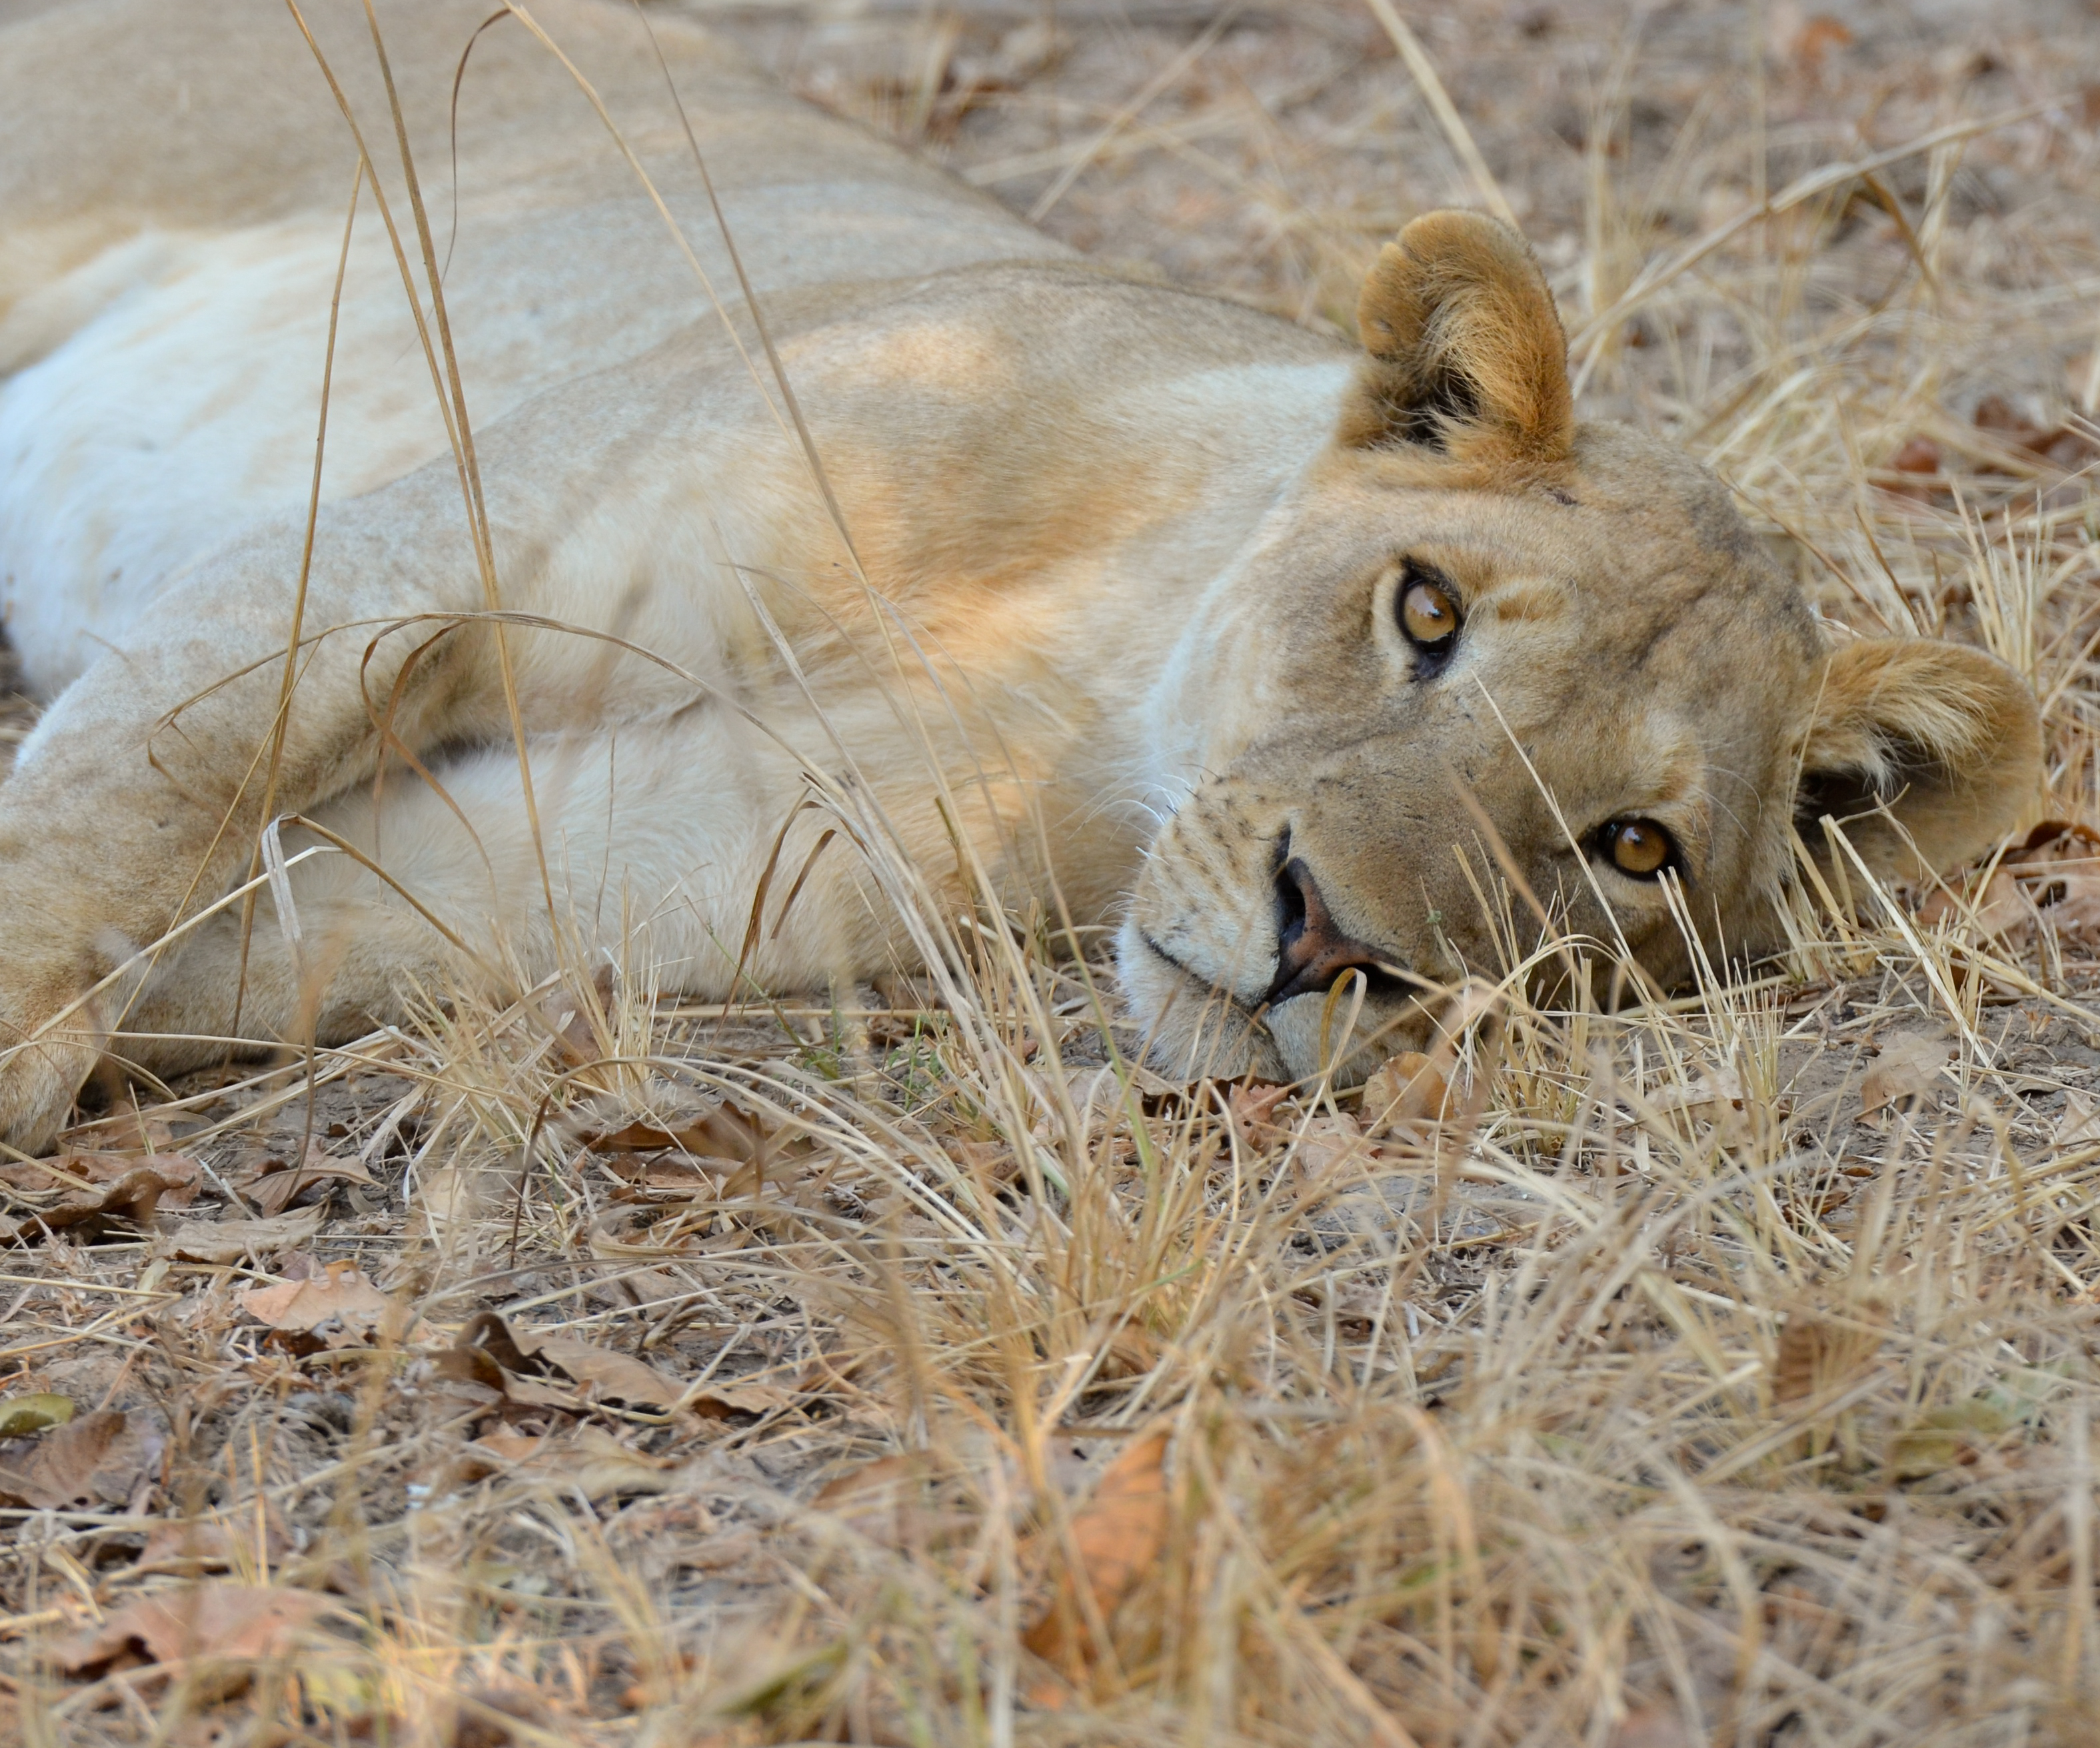 Lion in South Luangwa National Park